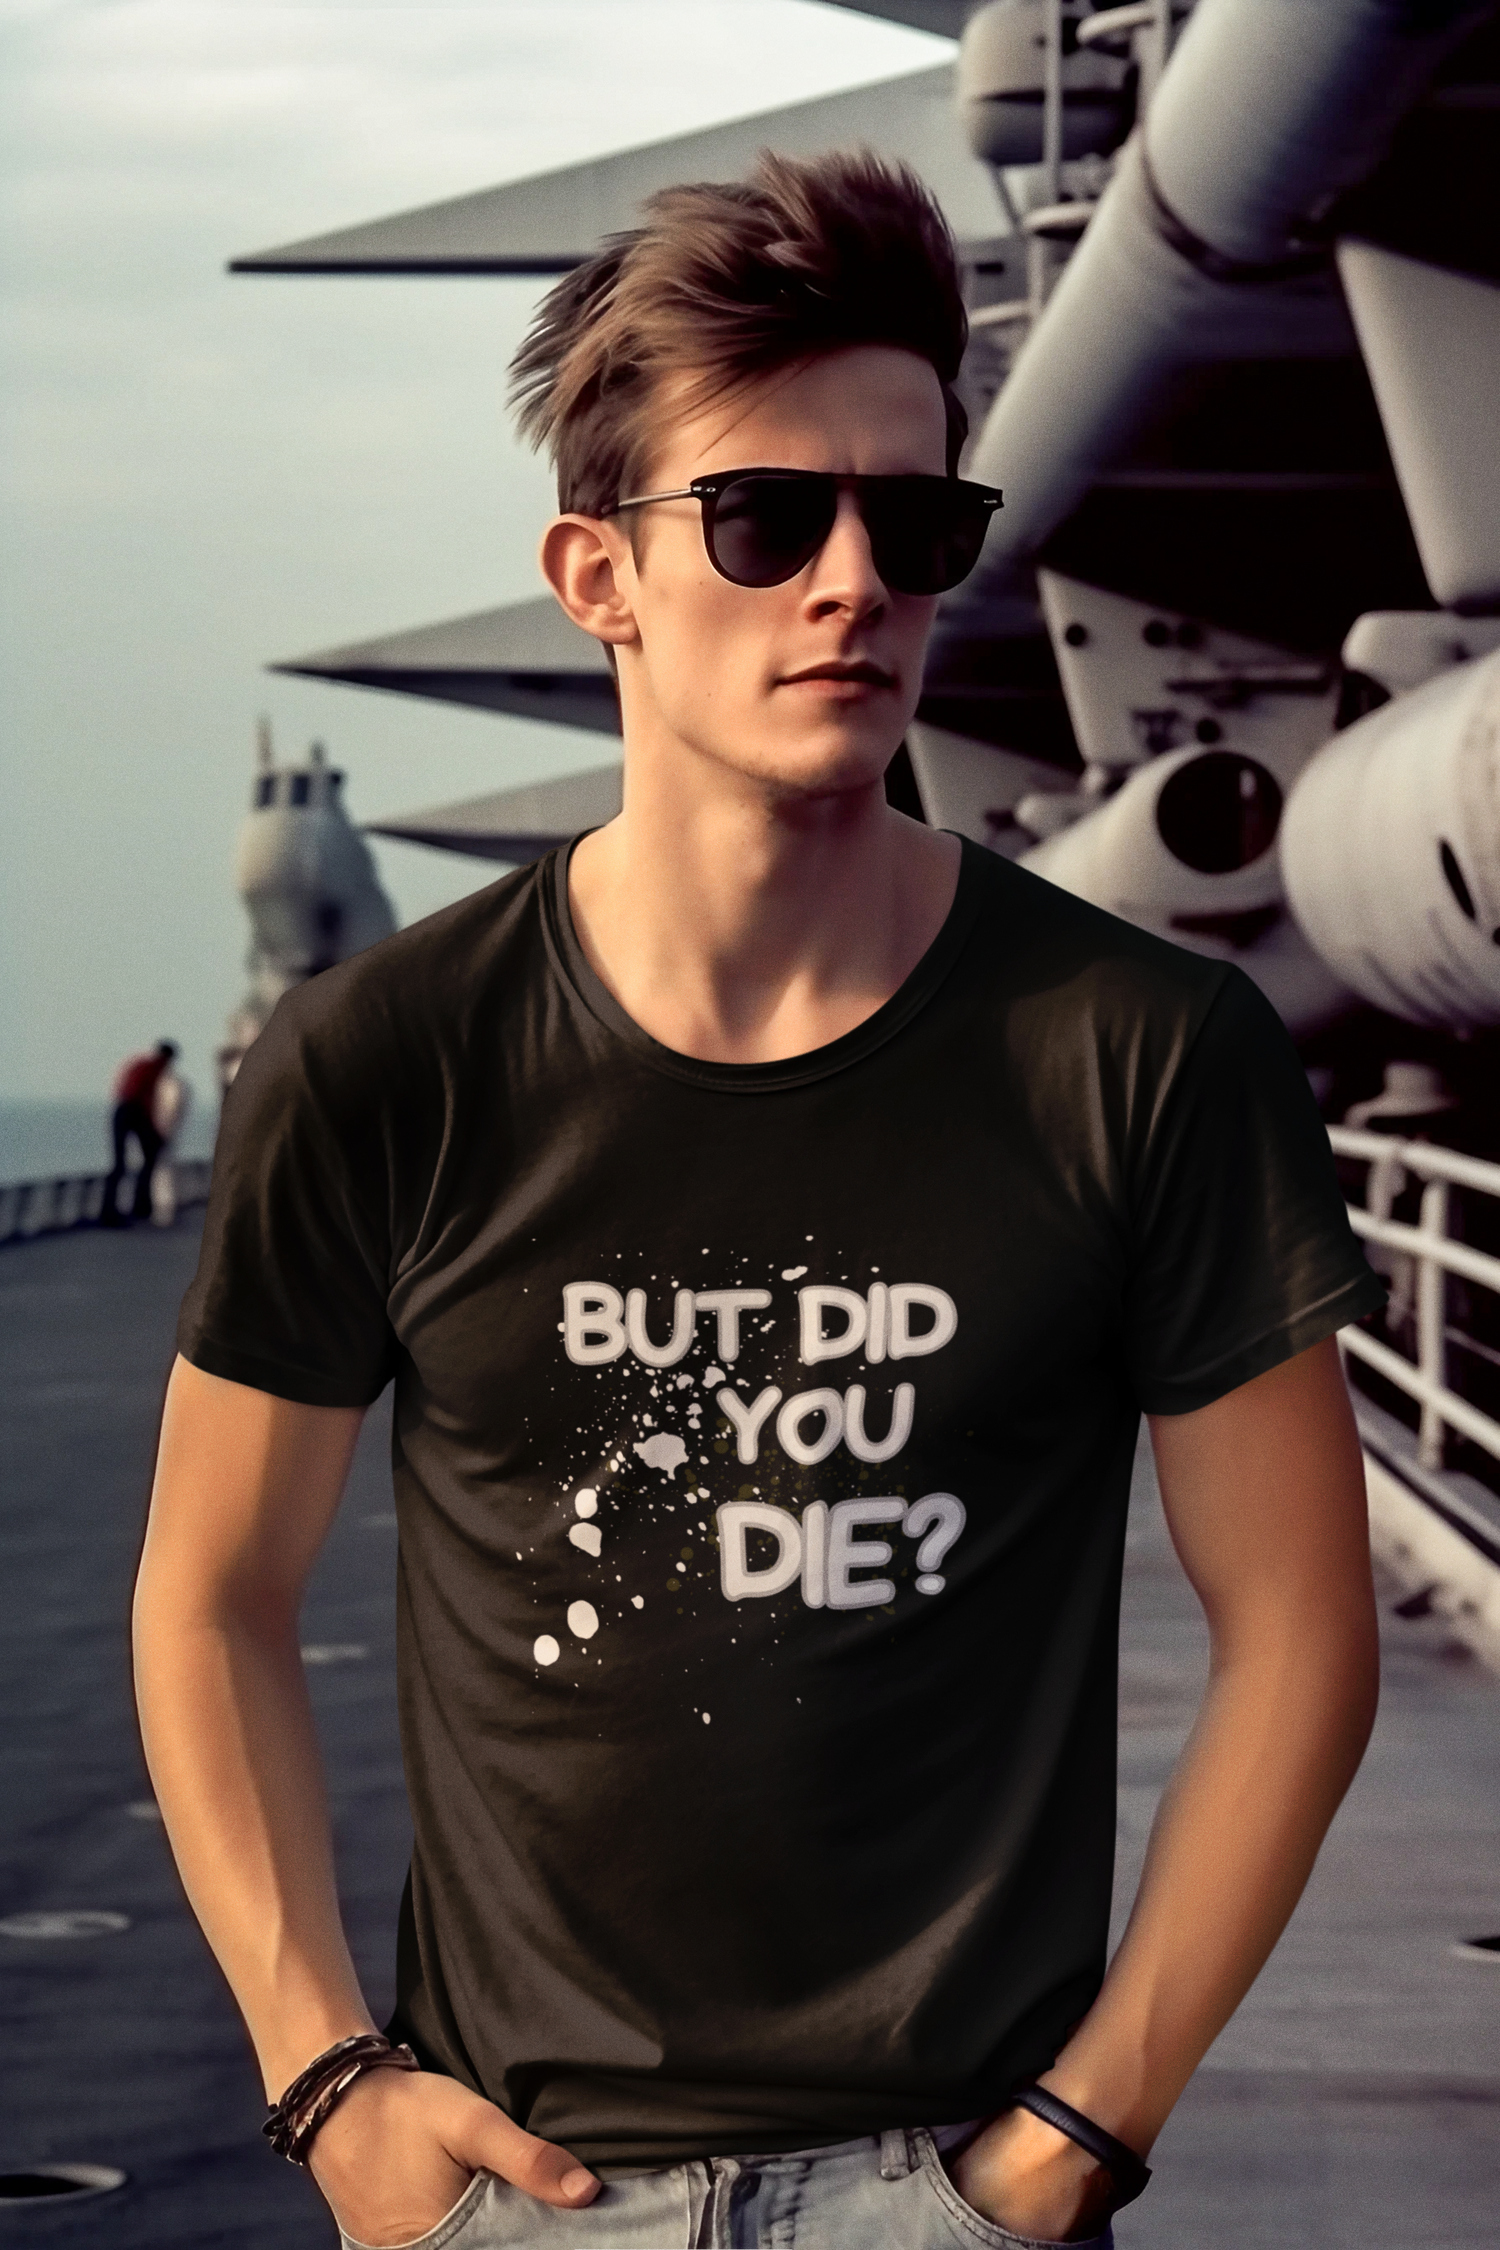 Black t shirt that says "But Did You Die?"